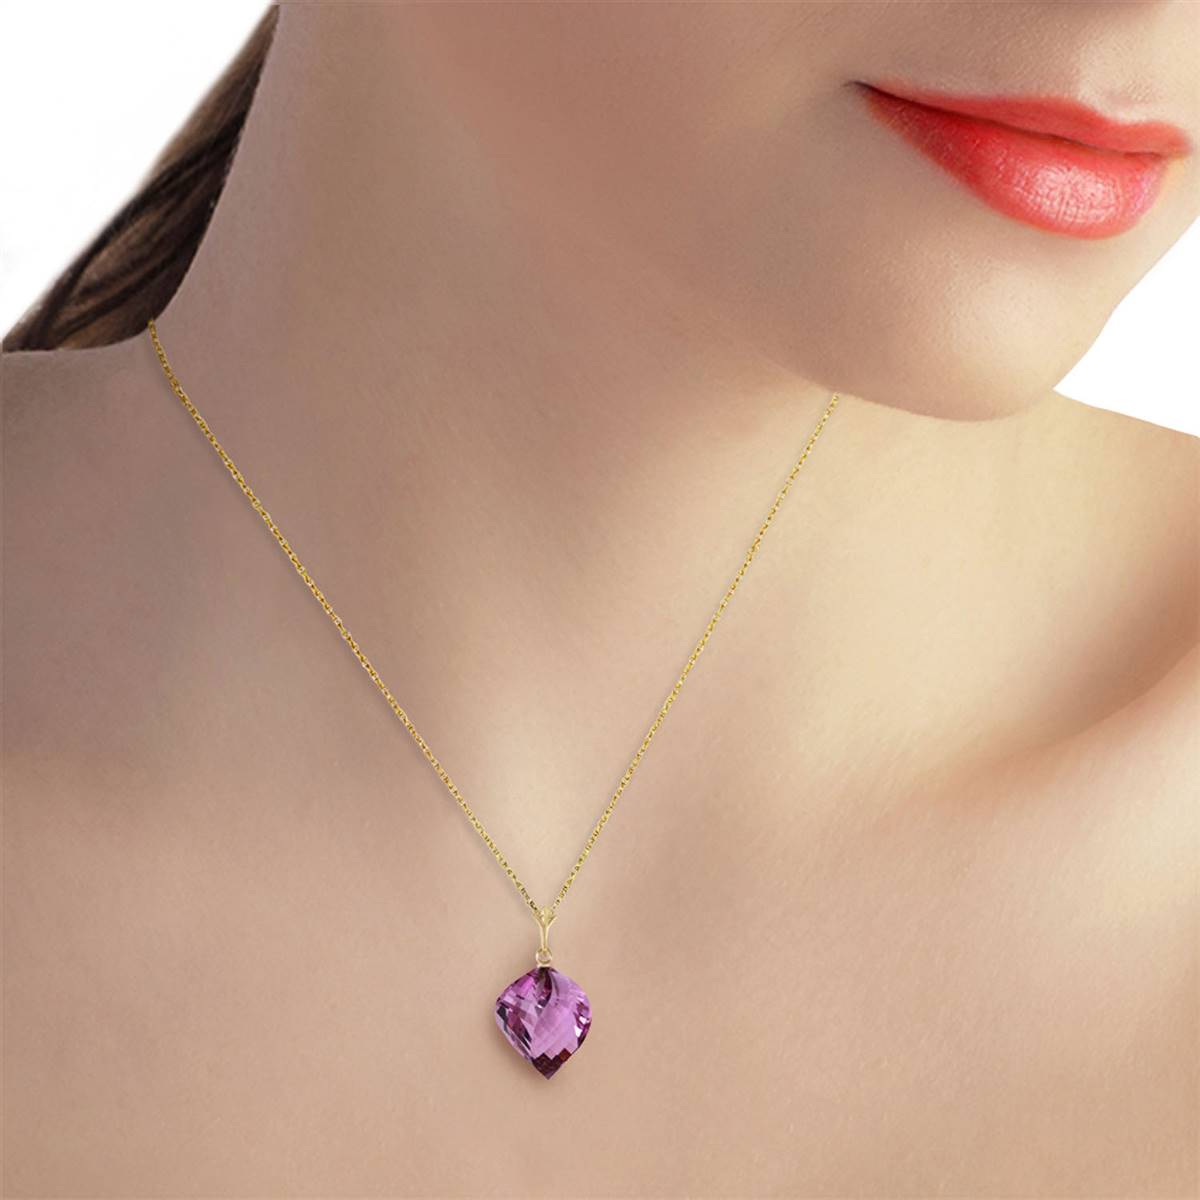 10.75 Carat 14K Solid Yellow Gold Necklace Twisted Briolette Amethyst